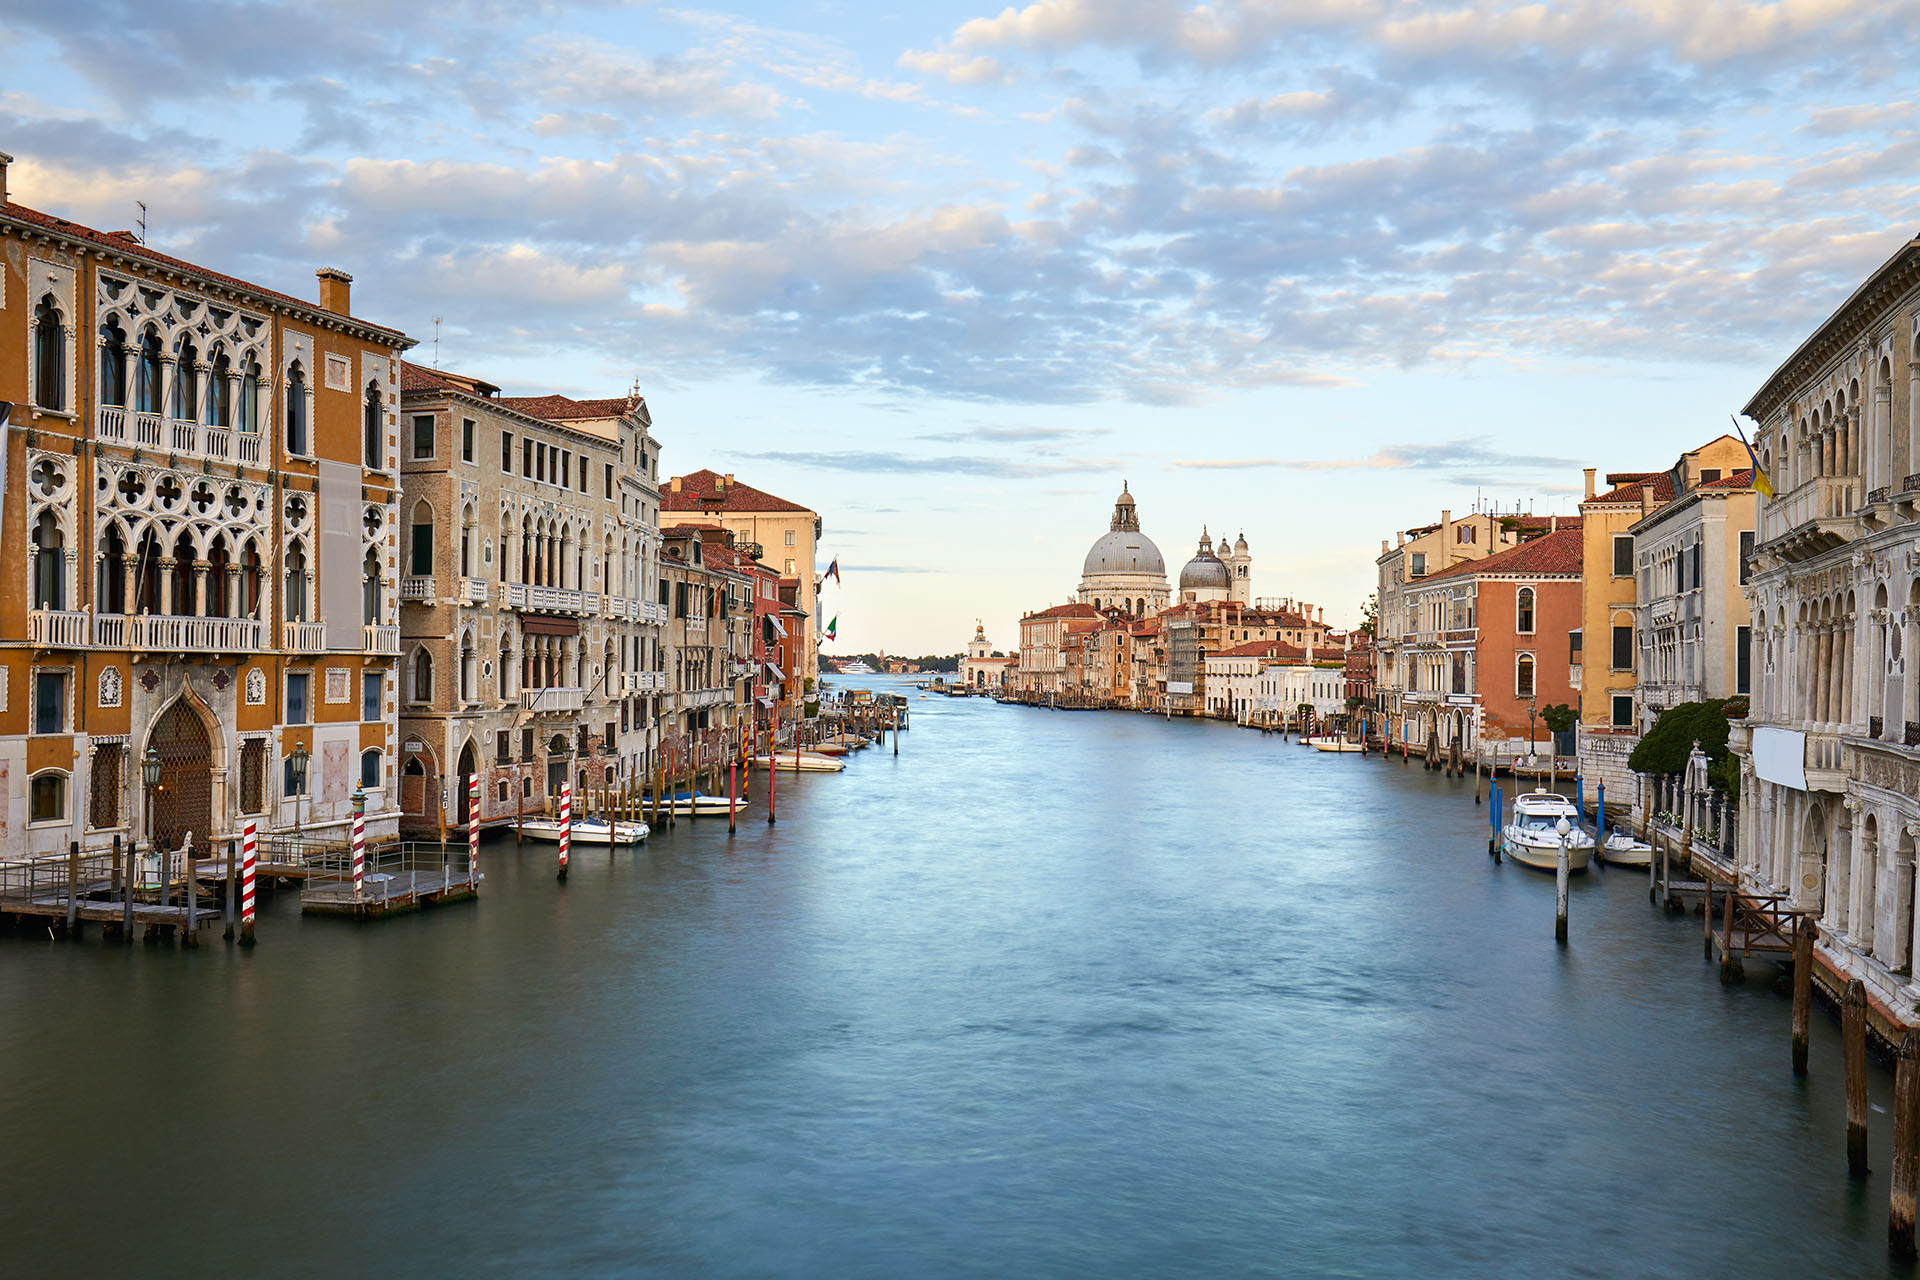 Gran Canal in Venice with no boats